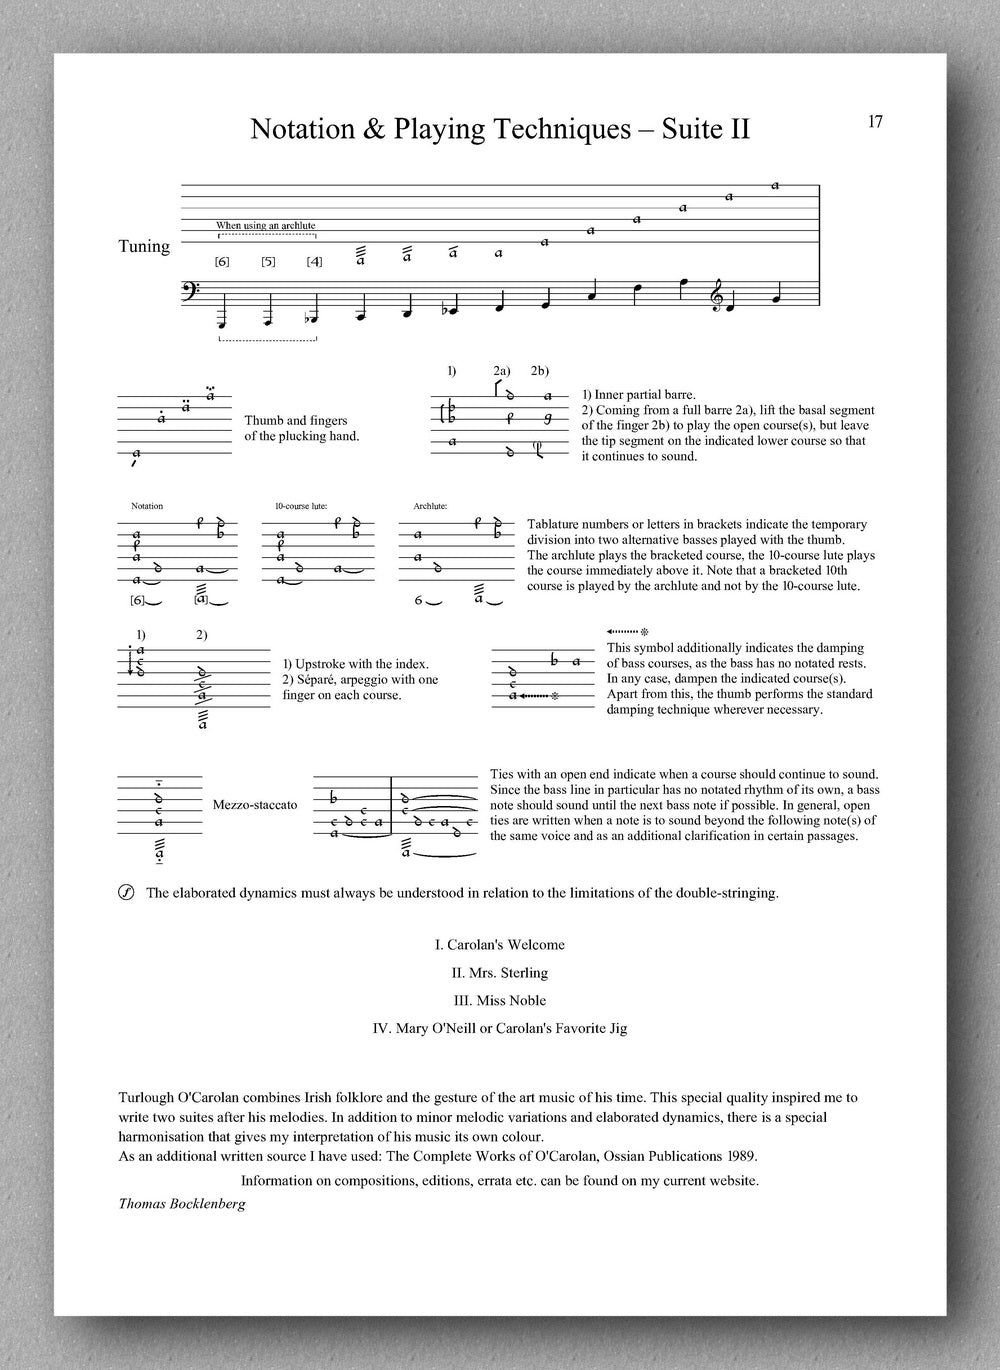 O'Carolan-Bocklenberg, Suite I & II - preview of the instructions